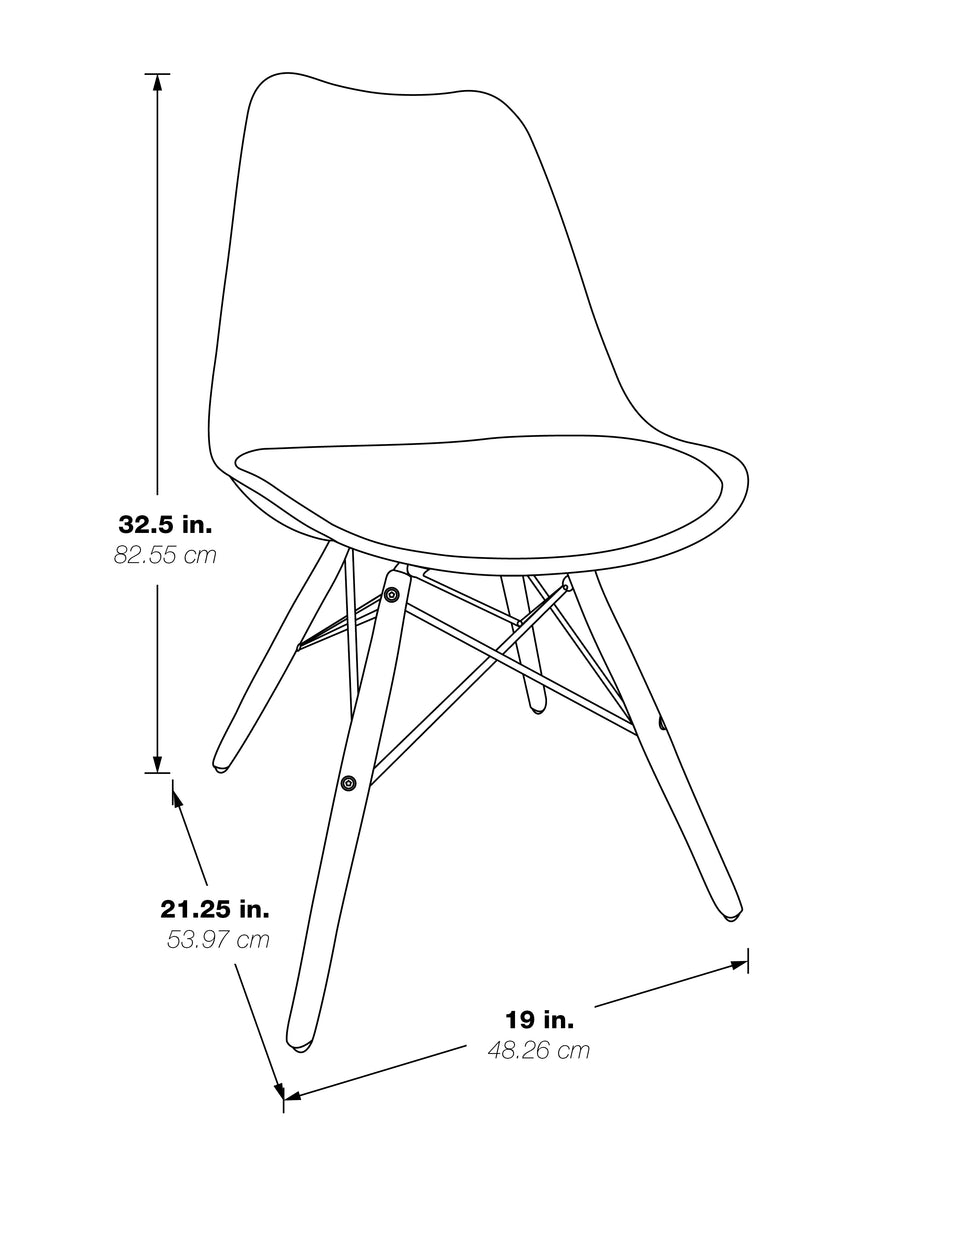 mid century modern aimes bucket chair with natural post legs scandinavian design inspired from decurban.com 3D dimensional drawing showing dimensions